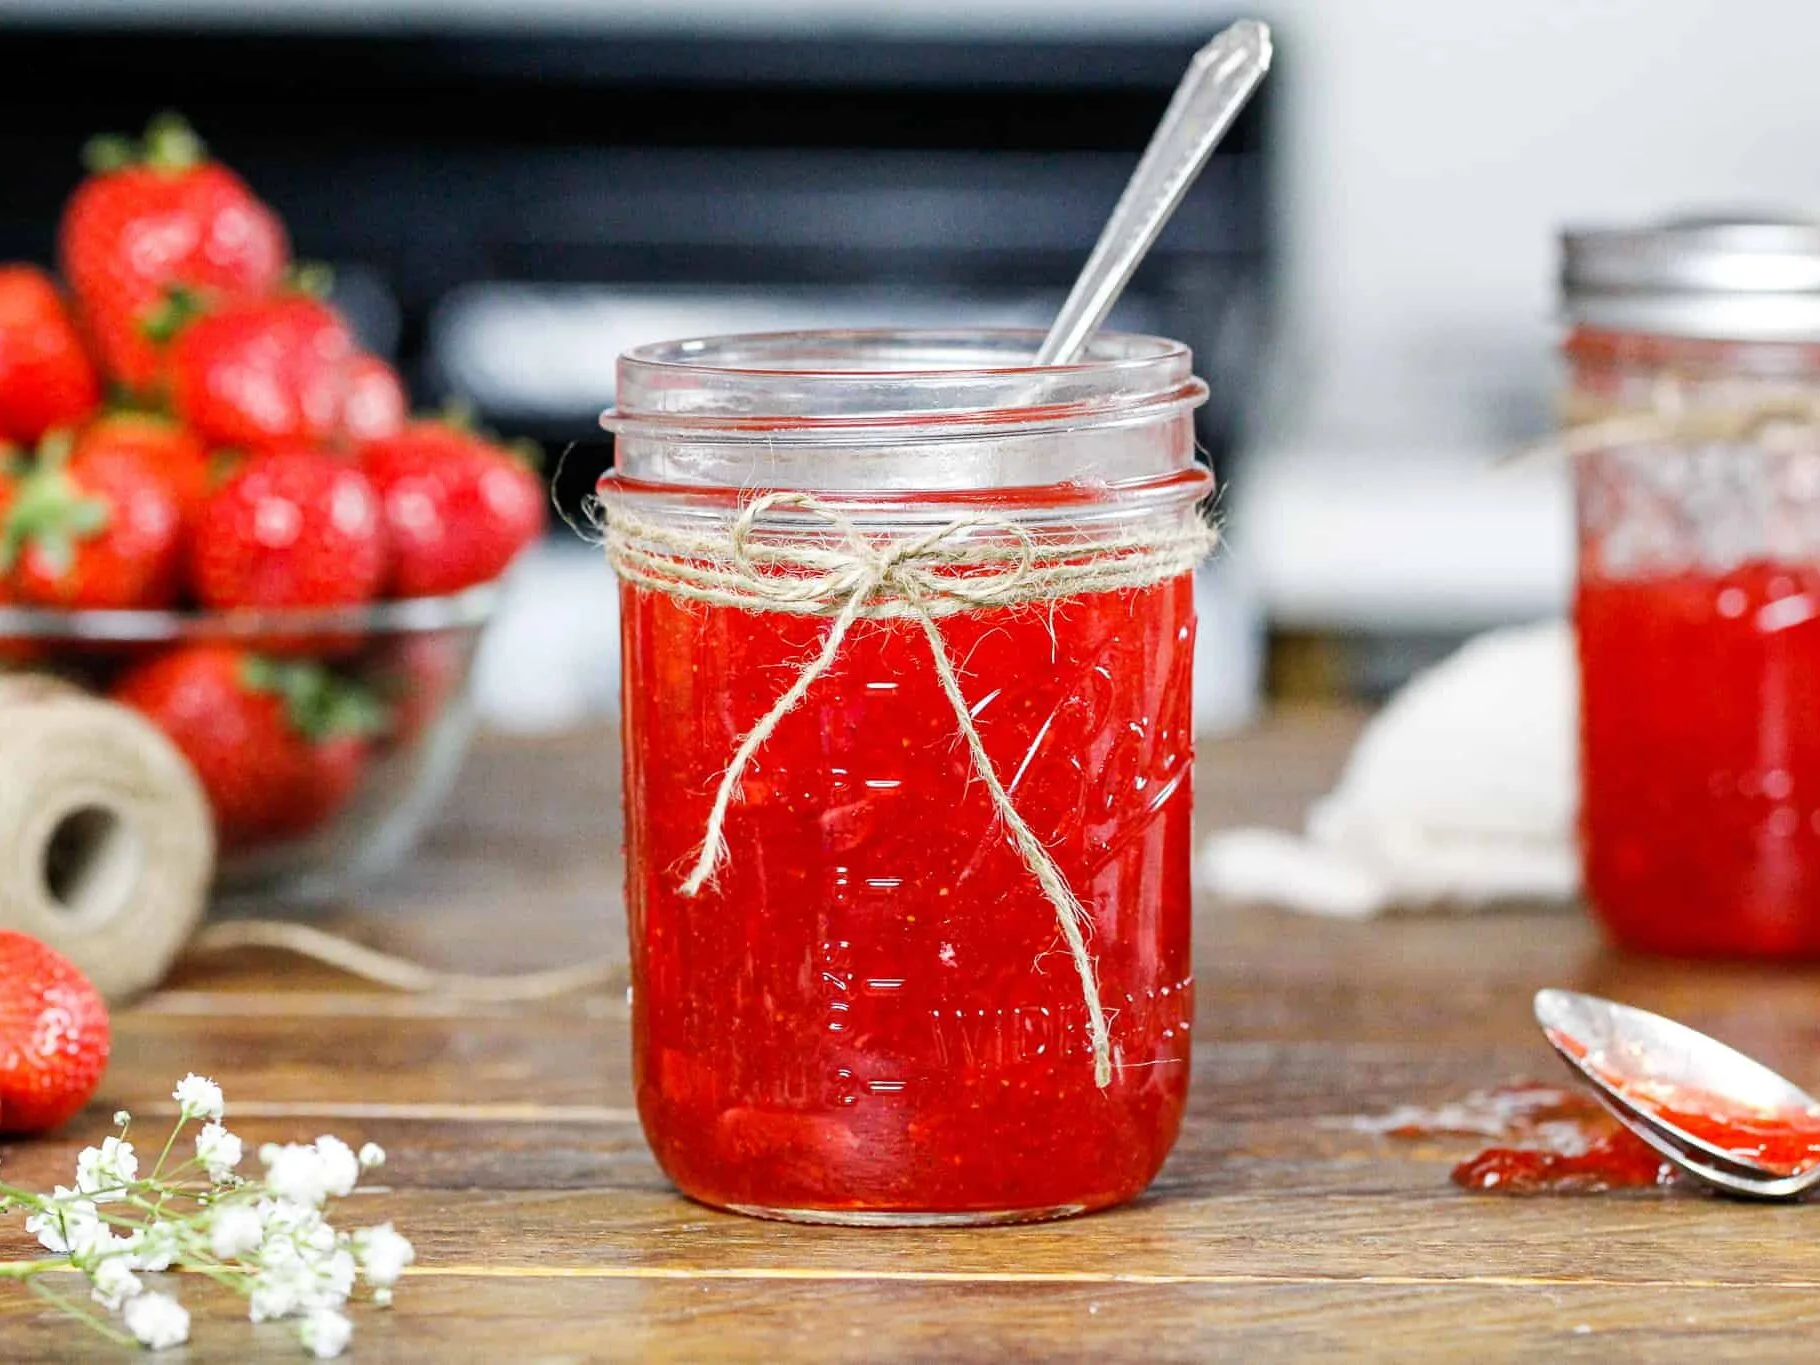 image of certo strawberry freezer jam that has set and is ready to be eaten